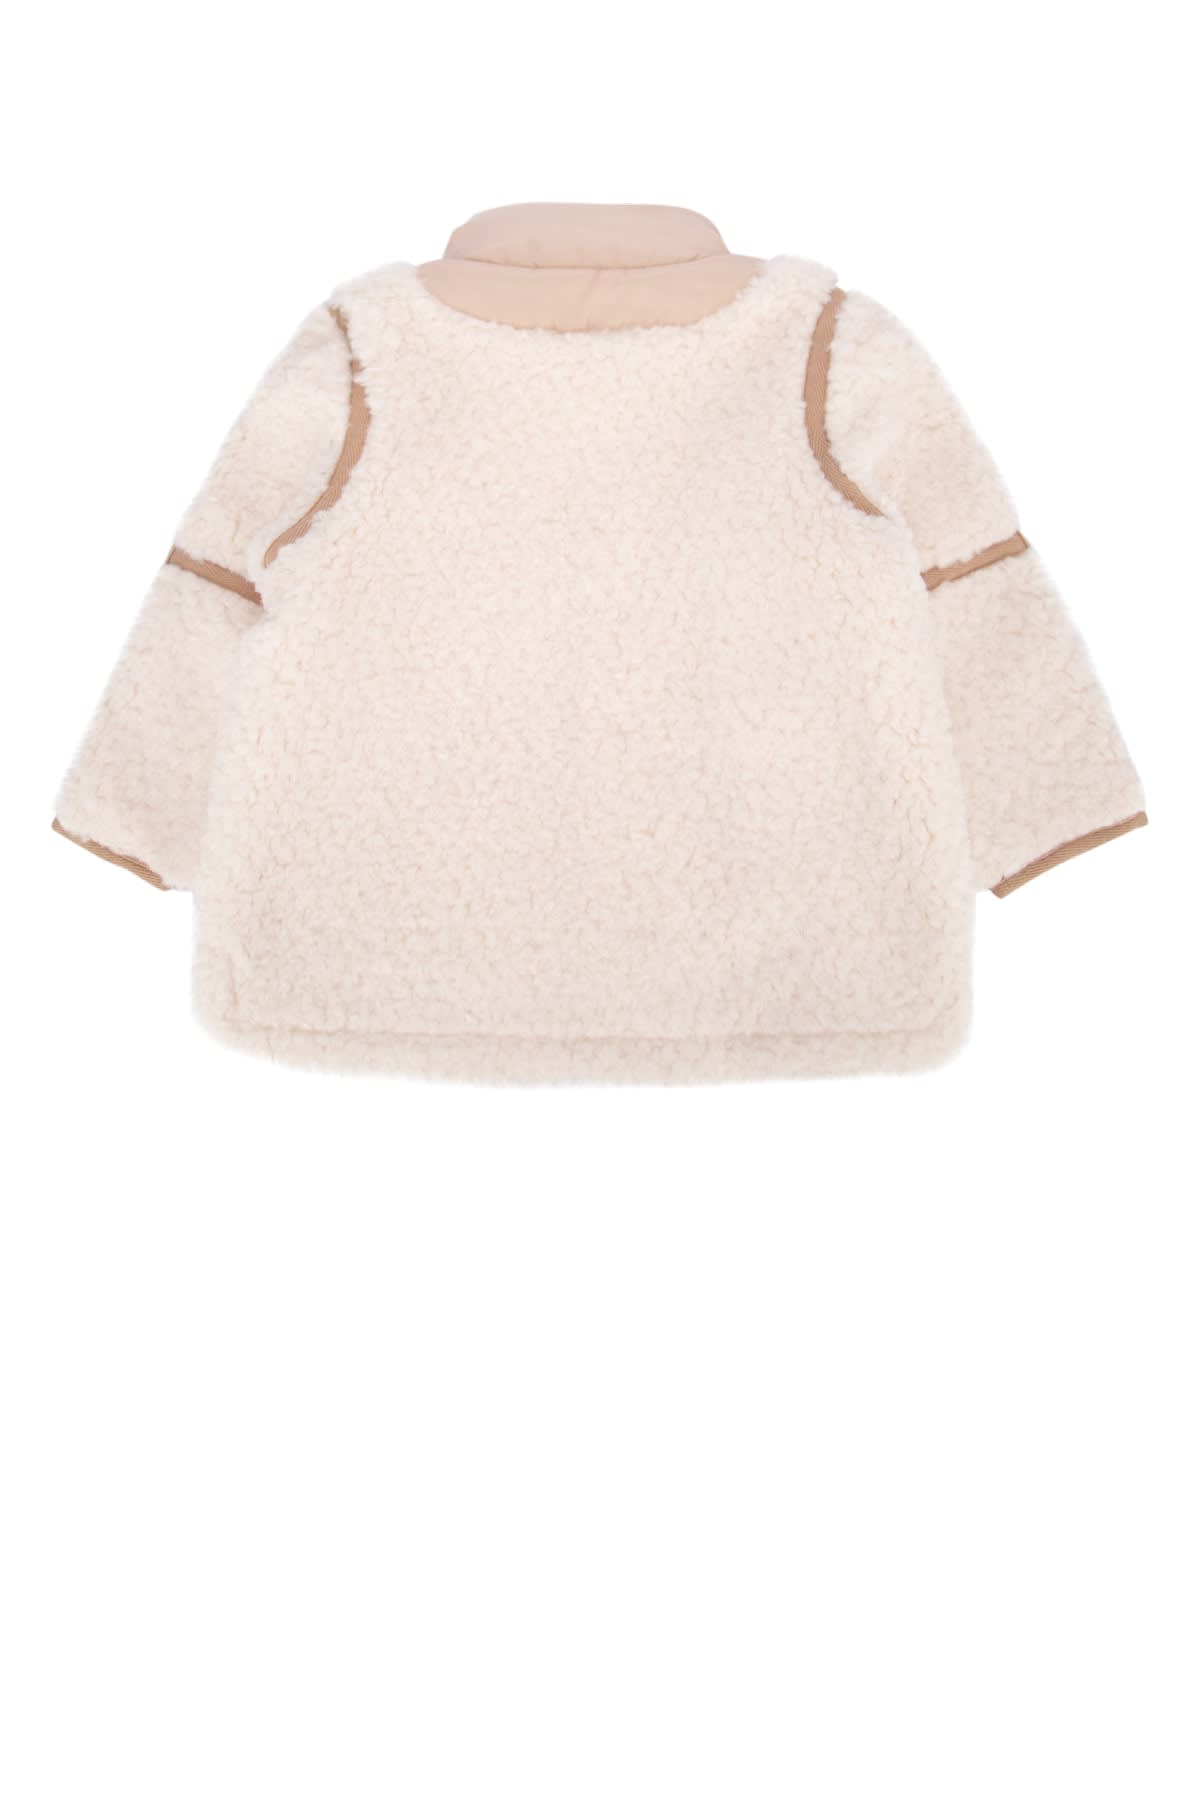 Chloé Kids' Cappotto In Ivory